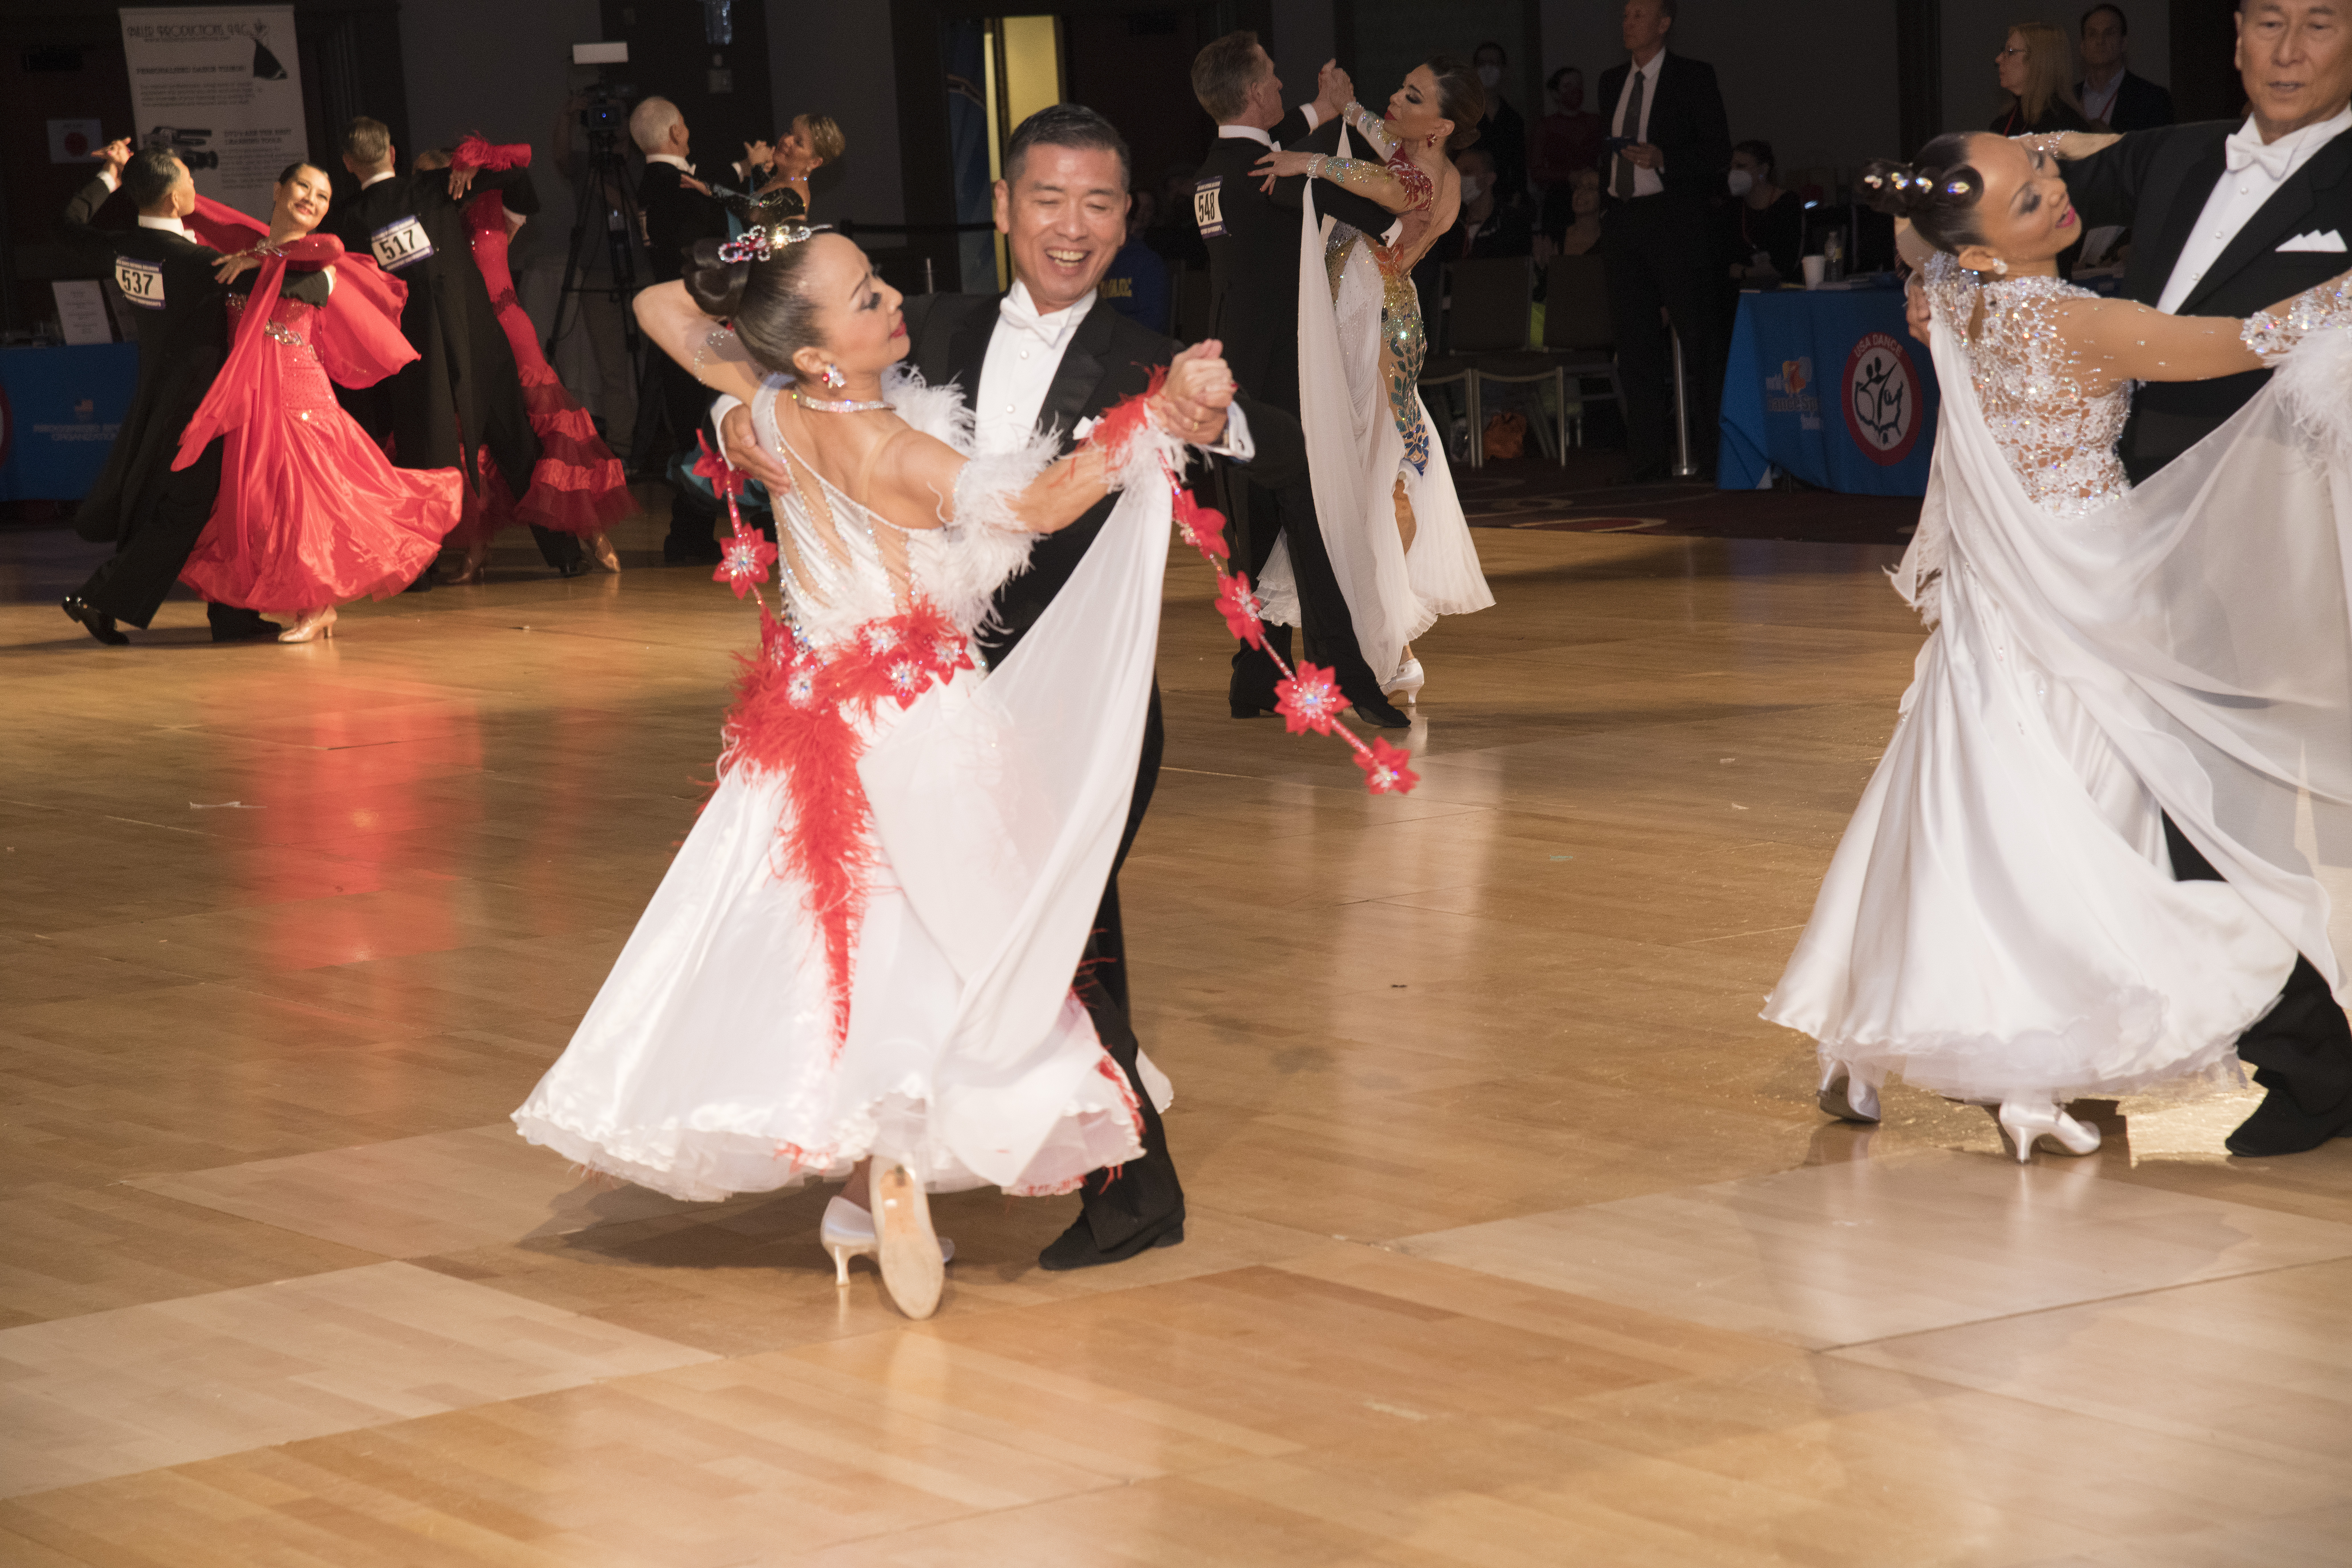 Senior Championships are always popular at Nationals. Here, Glenn Okazaki and Anne Chang enjoy a lovely final with their fellow Senior IV Standard dancers. Photo by Carson Zullinger.